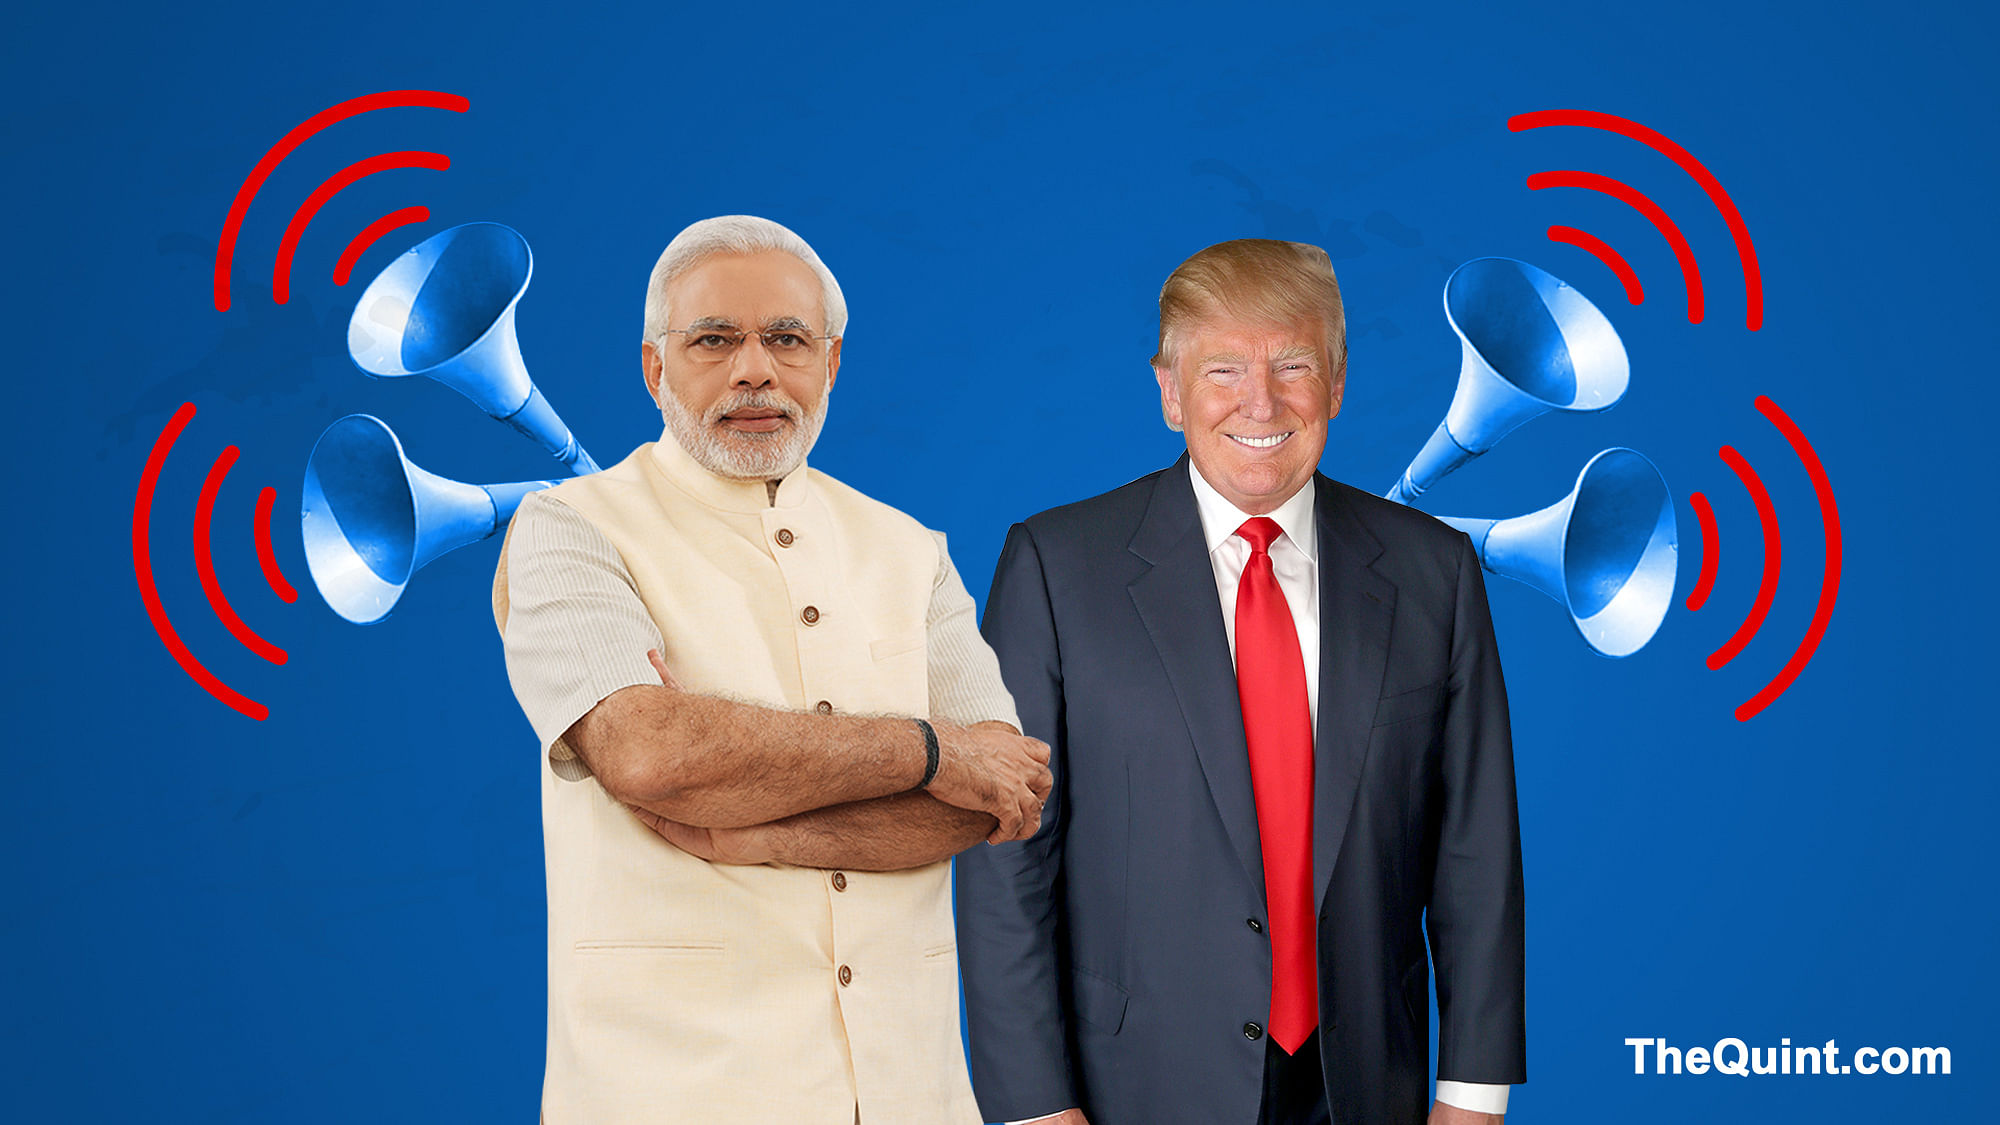 Post-truth politics as espoused by Modi-Trump, starts a trend where facts don’t really matter. (Photo: <b>The Quint</b>)